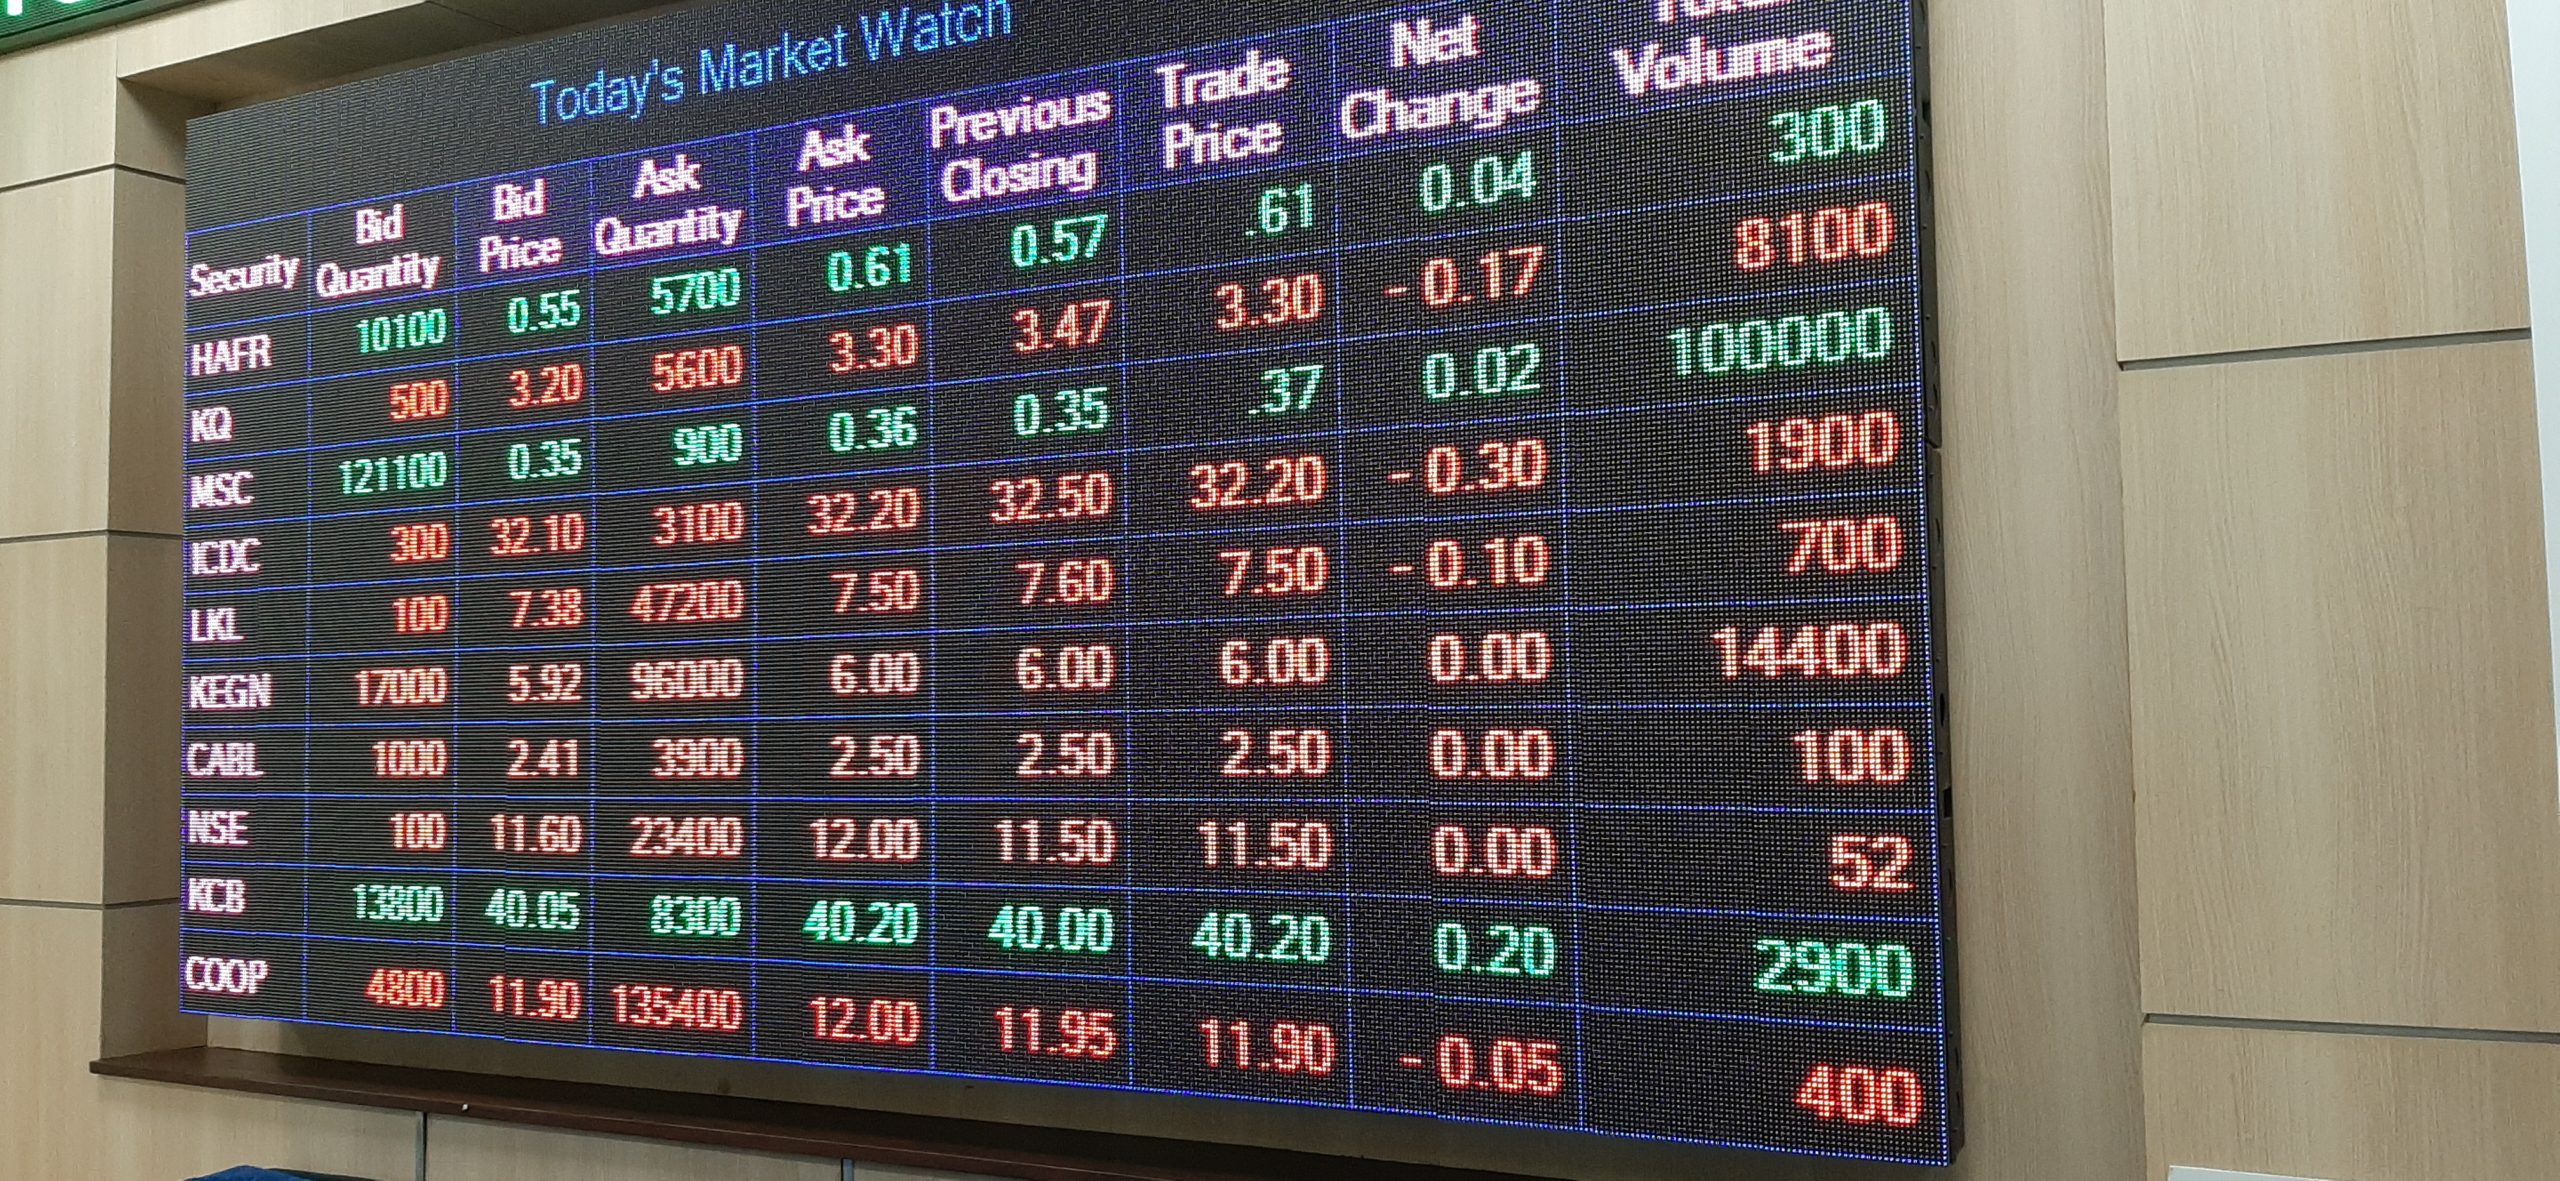 Investors in publicly listed firms at NSE set for barren dividends season